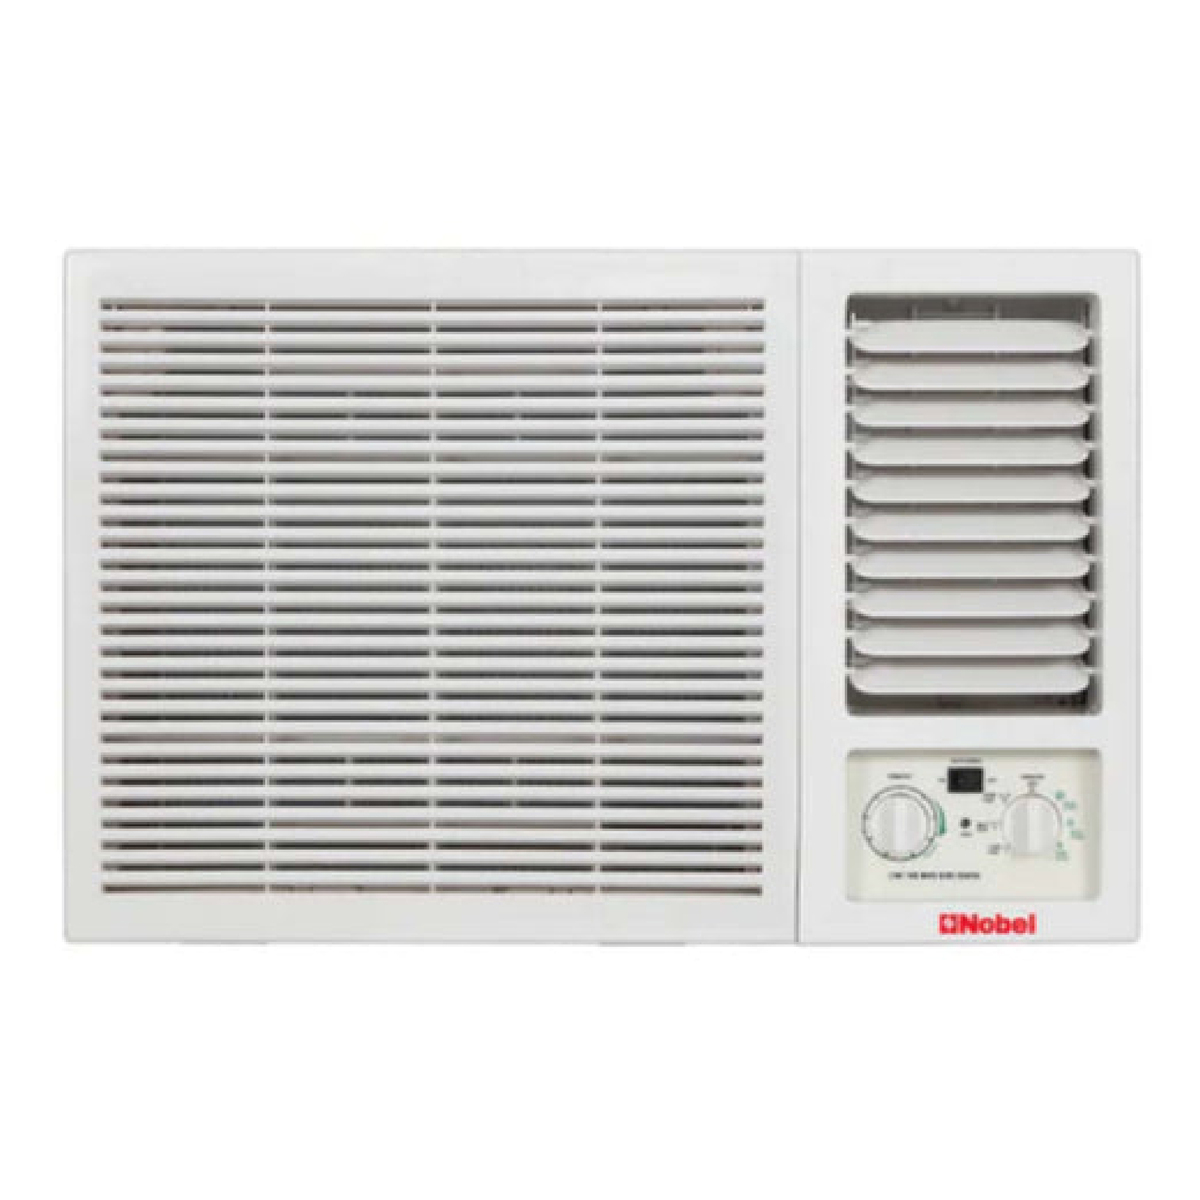 Nobel 2 T Window Air Conditioner, Rotary Compressor, White, NWAC24C